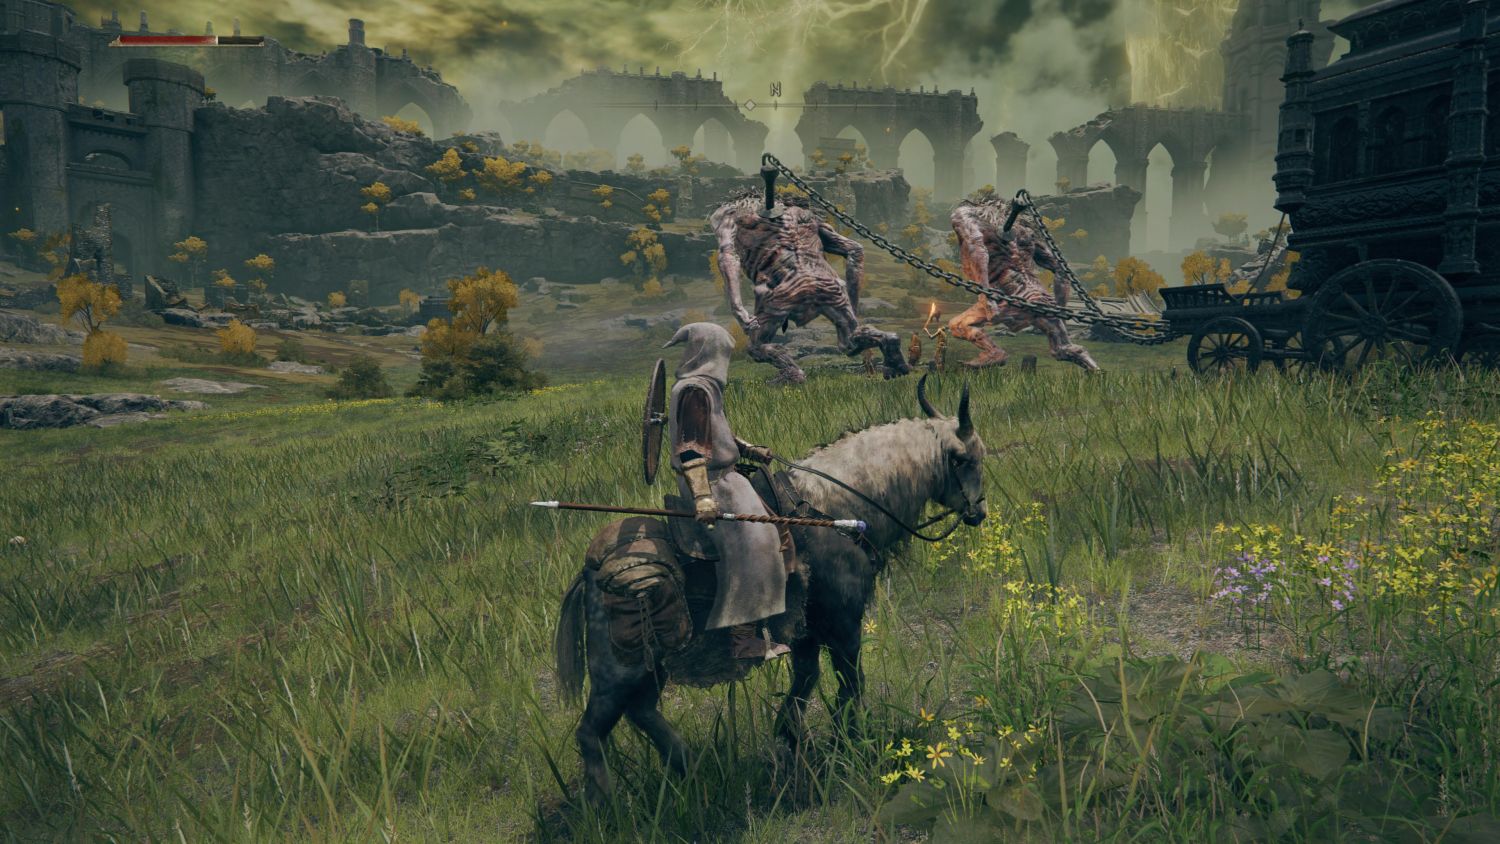 The Spectral Steed is a great addition to Elden Ring